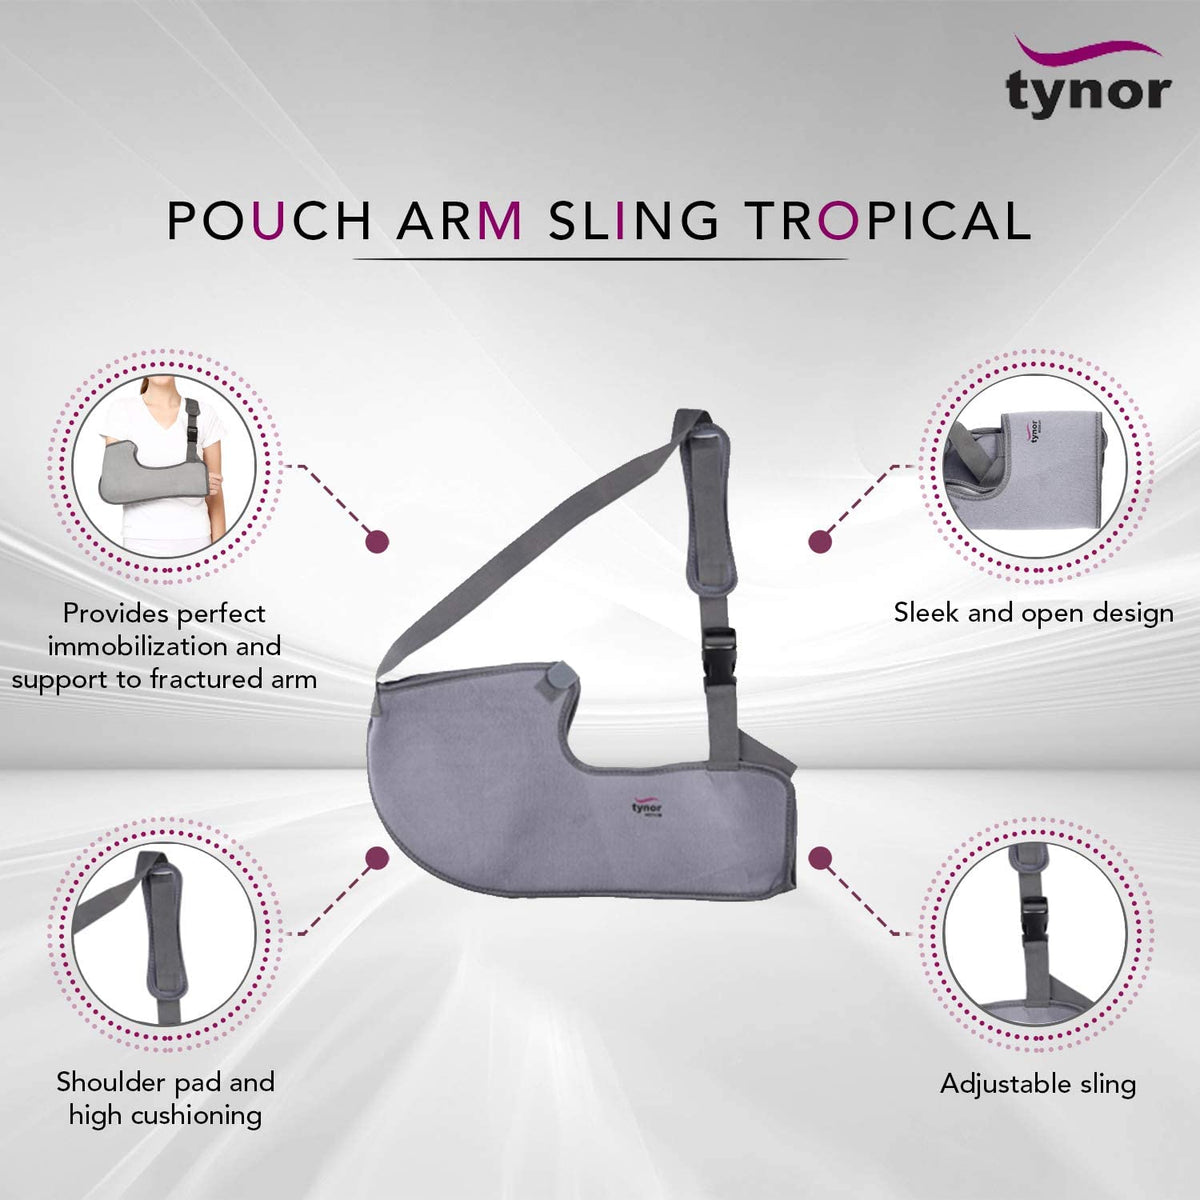 pouch-arm-sling-tropical-3